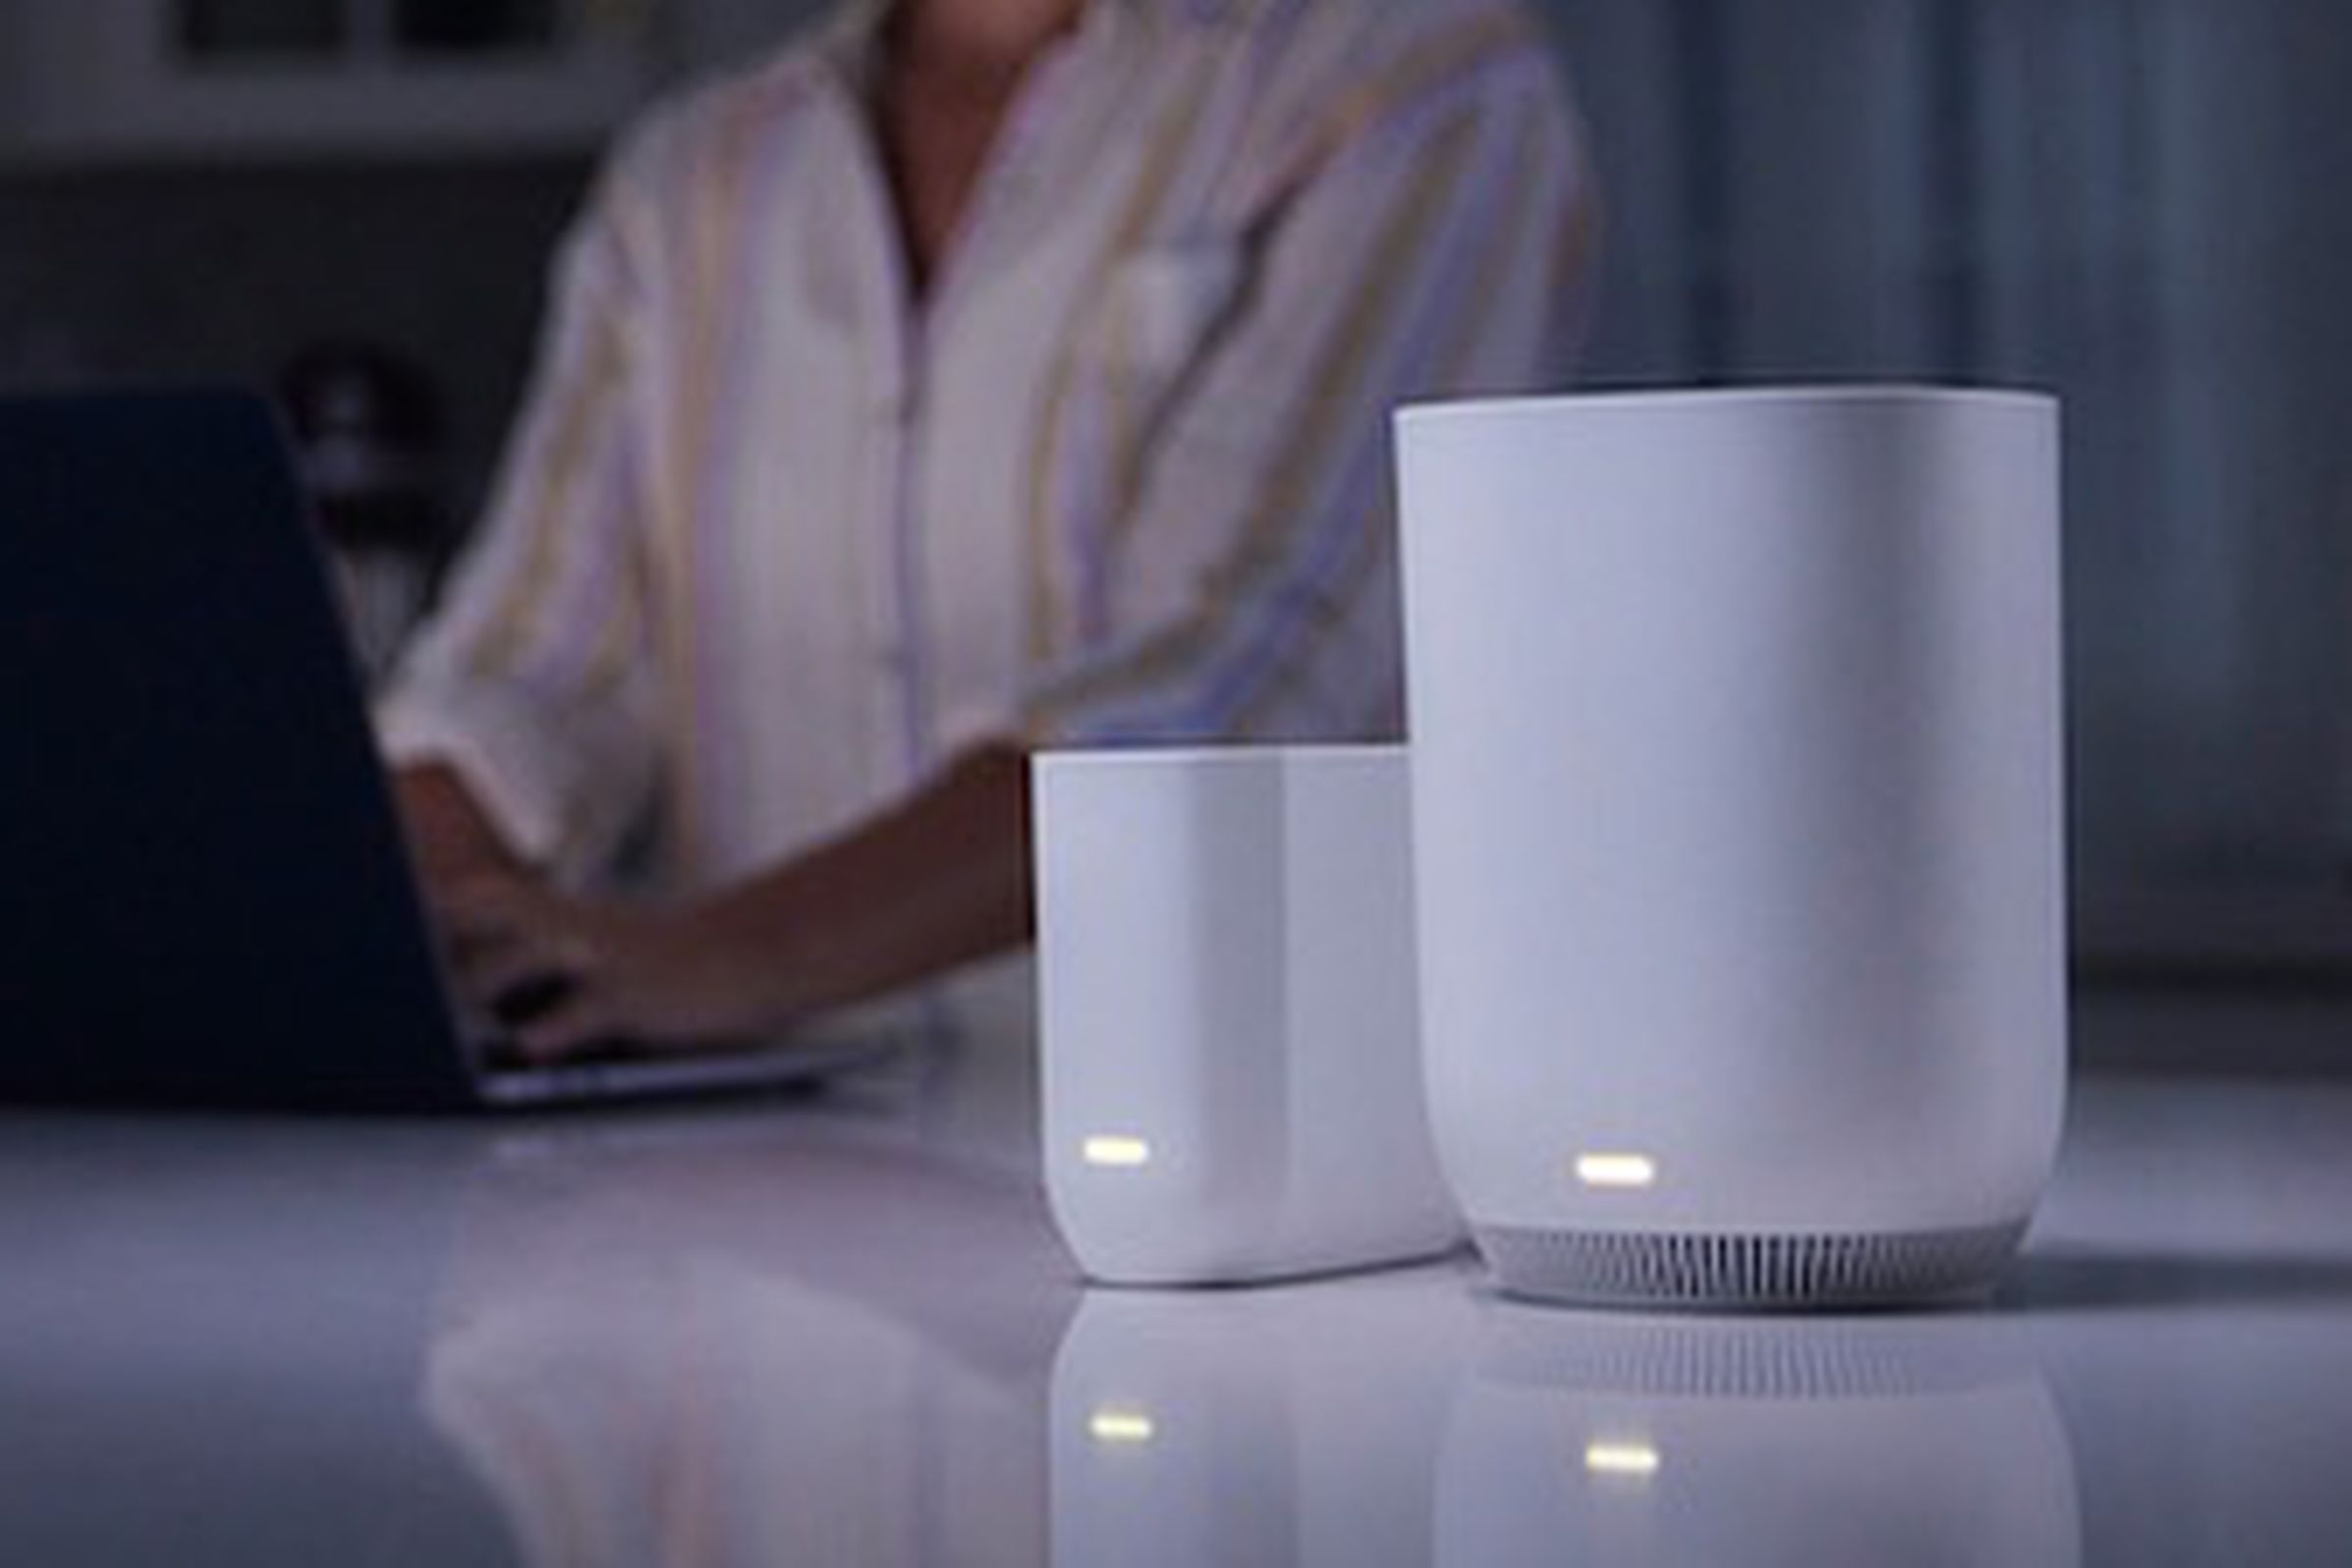 The Xfinity Storm-Ready WiFi on a table in a dark kitchen.